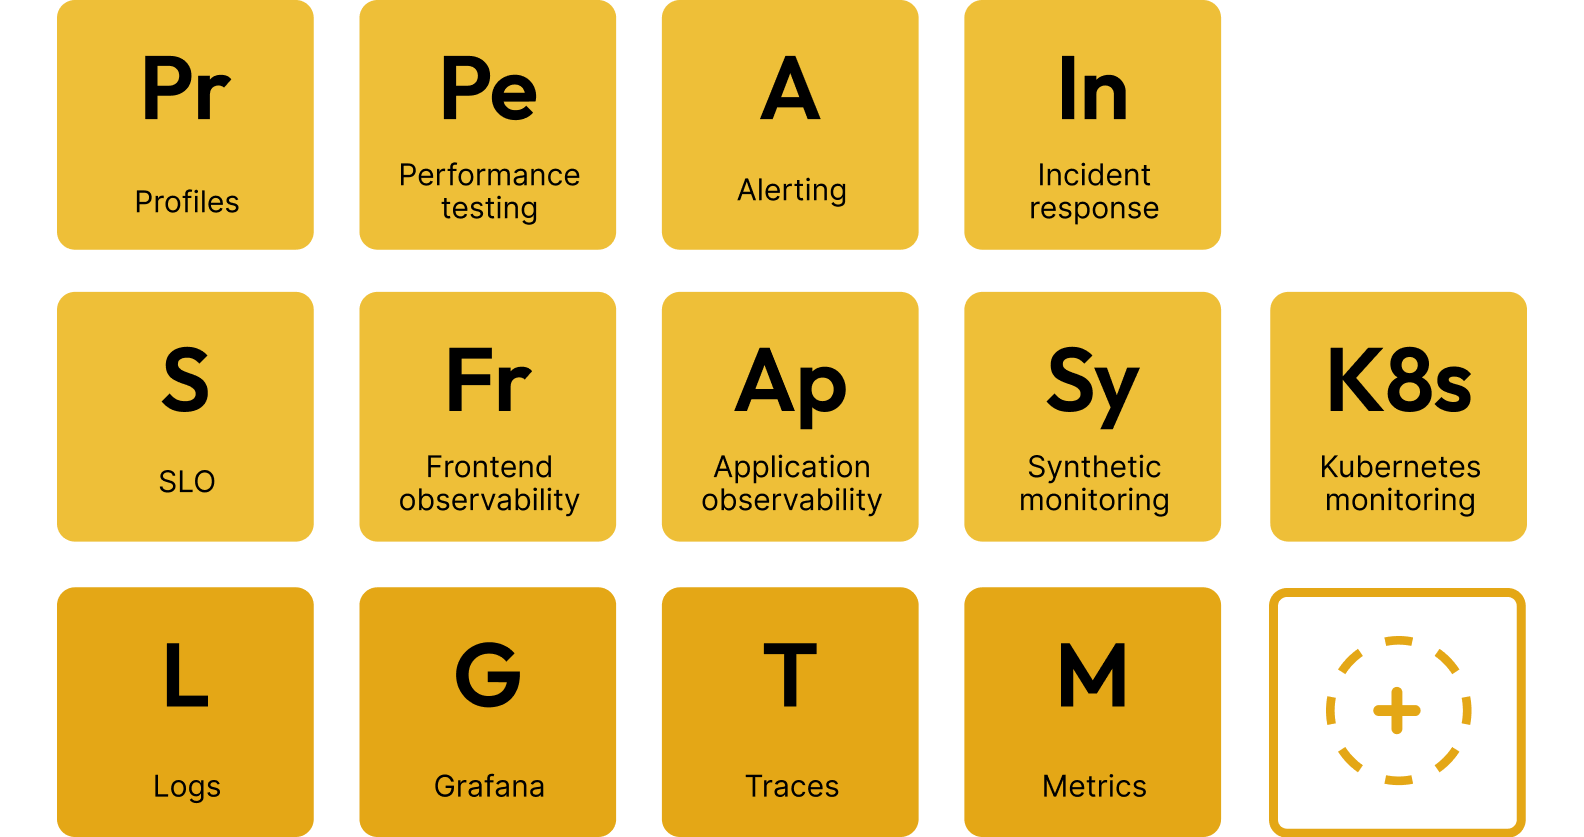 Periodic table of observability